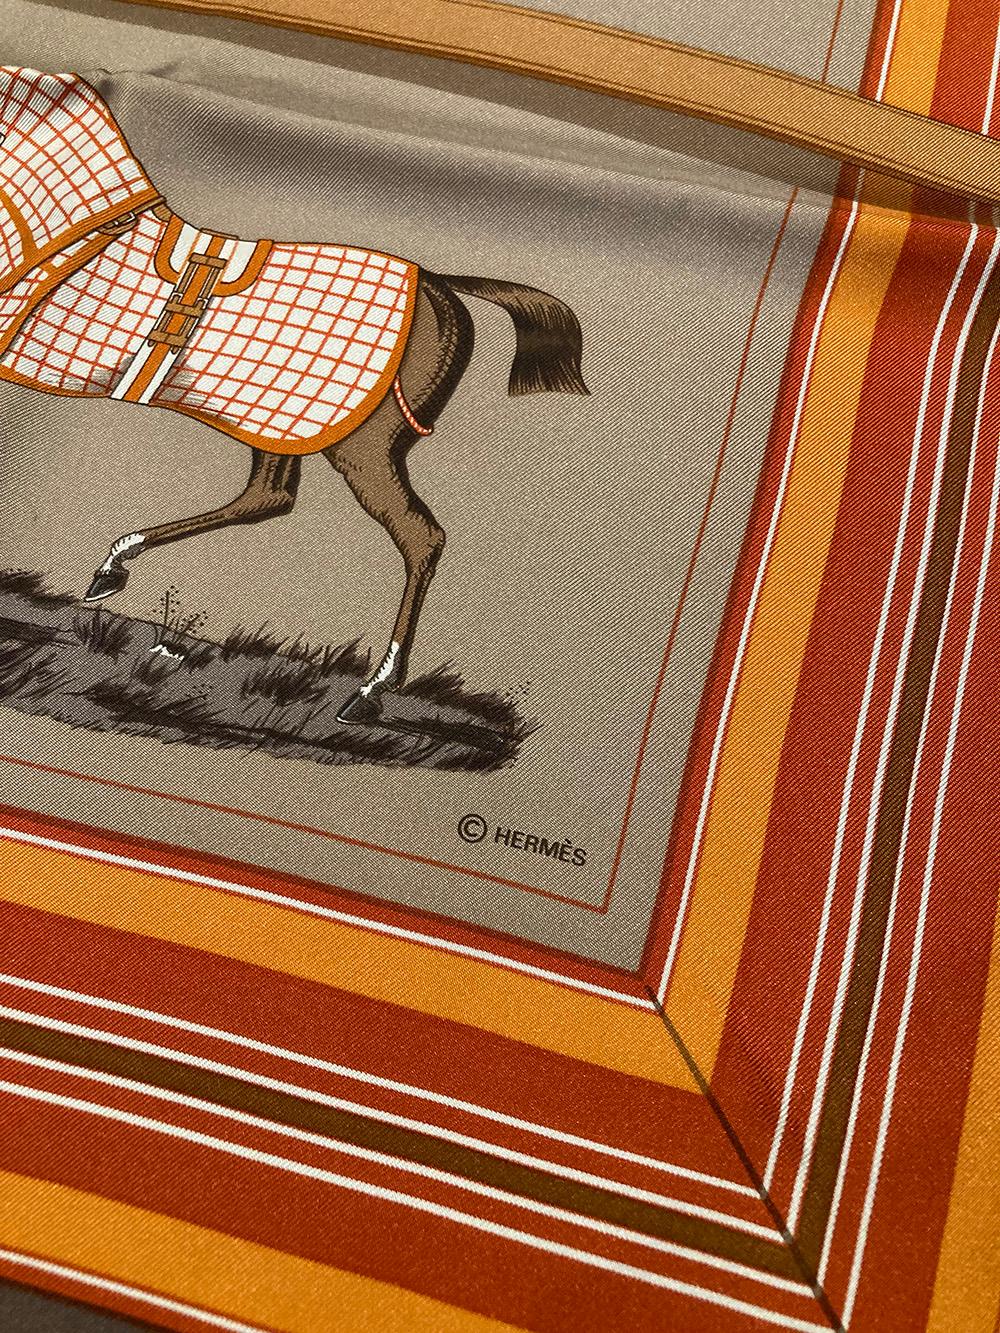 BEAUTIFUL Hermes couvetures et tenues de jour silk scarf in brown, tan, gray and orange. excellent condition no stains smells or fabric pulls.  Original silk screen design c1974 by Jacques Eudel features an array of show horses dressed in various